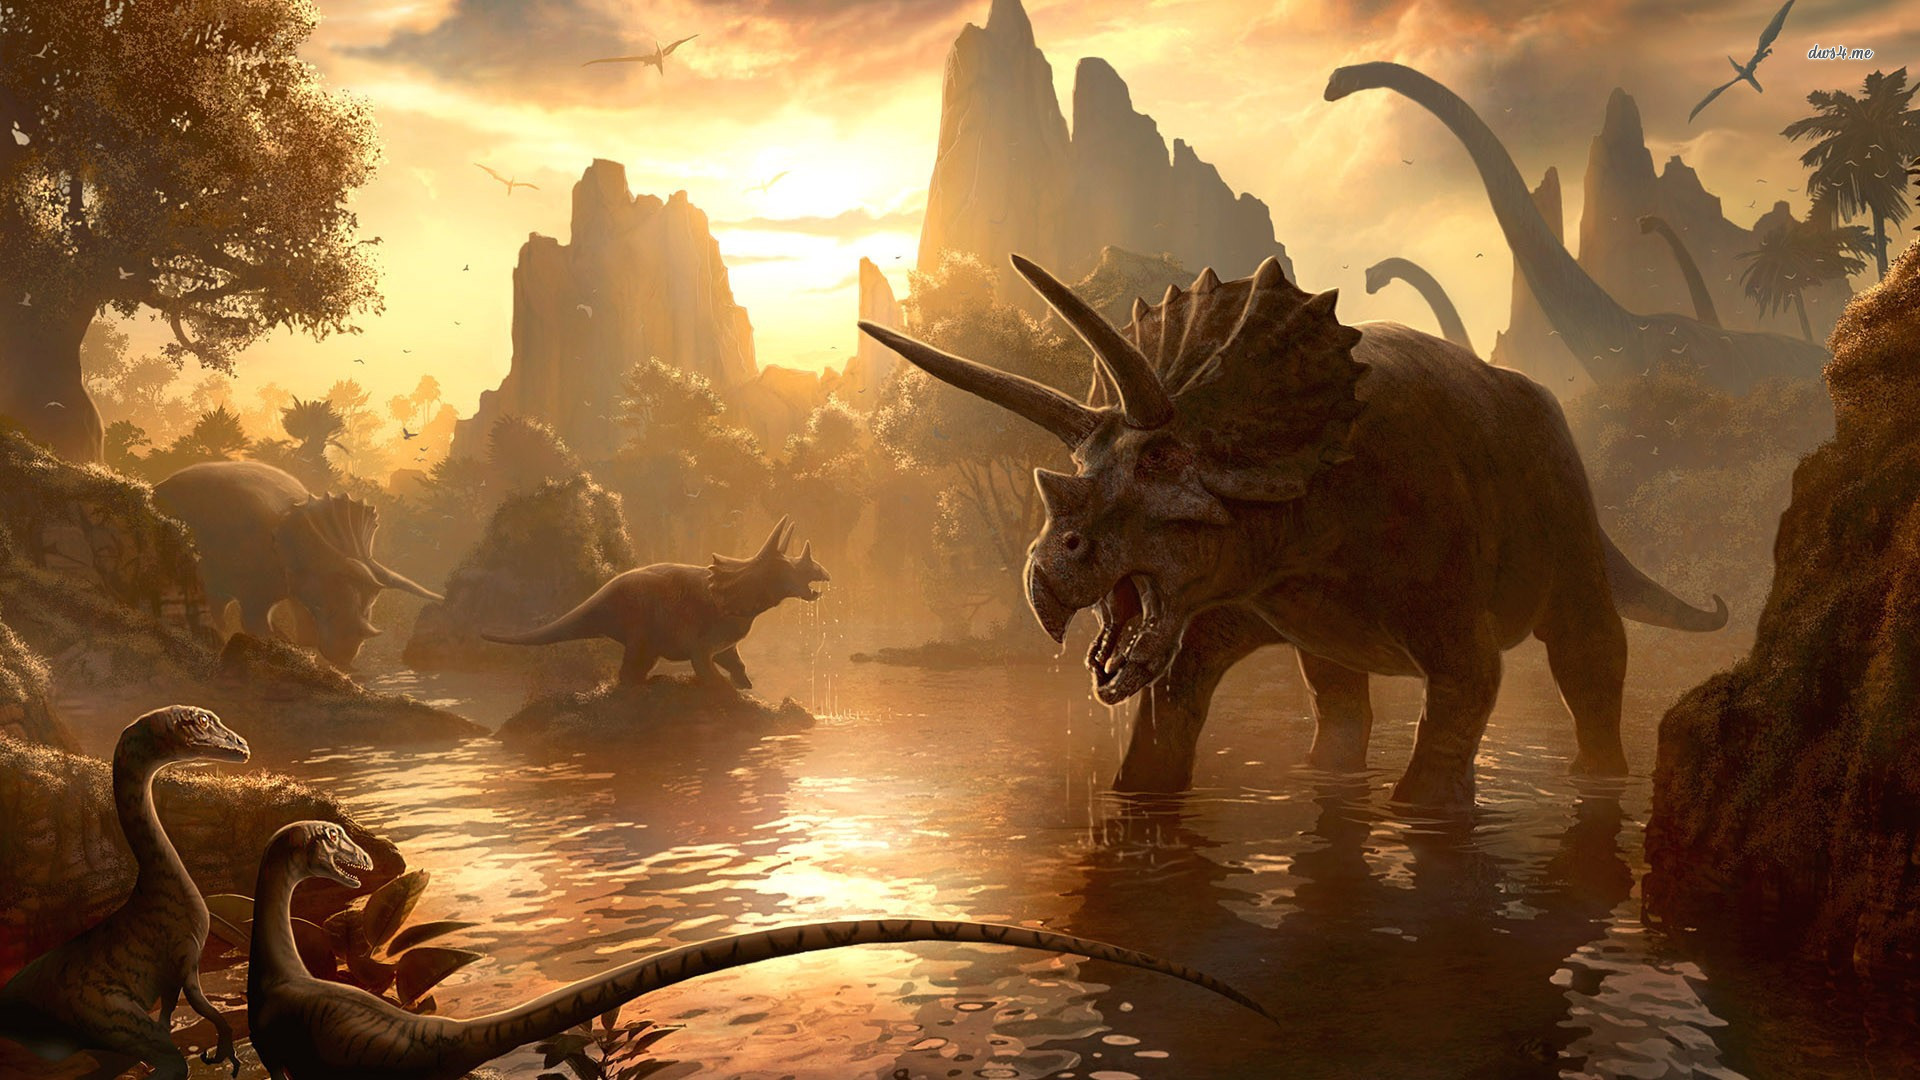 1920x1080 Wallpapers HD 1080P Dinosaurs. Dinosaurs, 1080p, Wallpapers, Dinosaurs .